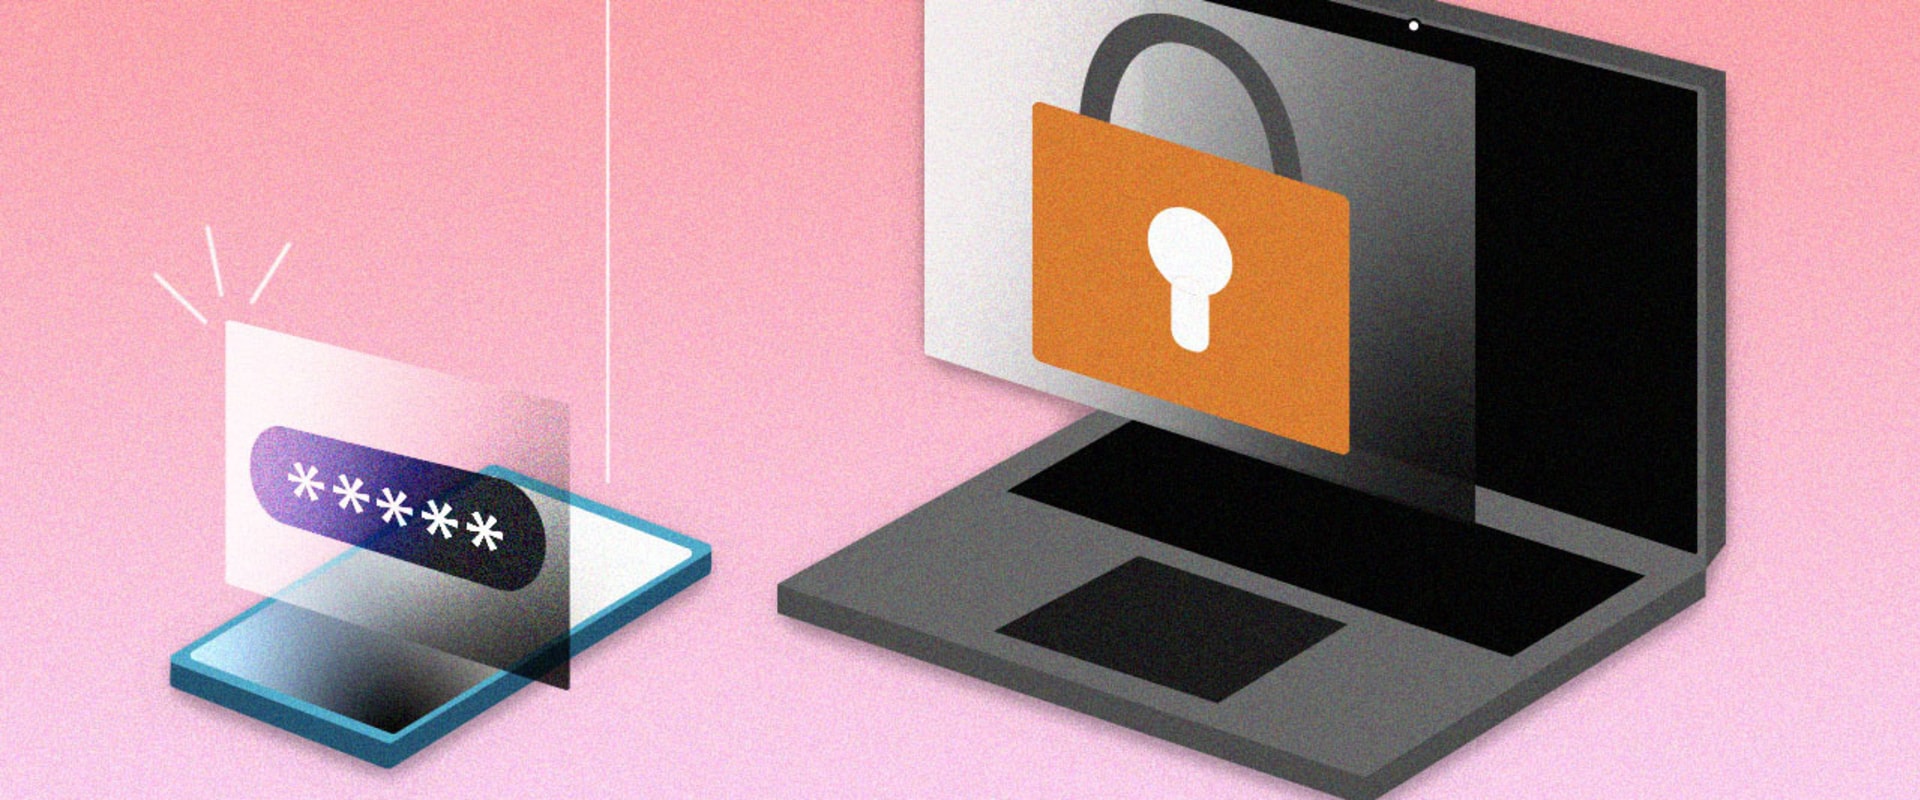 Securing Funds with Two-Factor Authentication